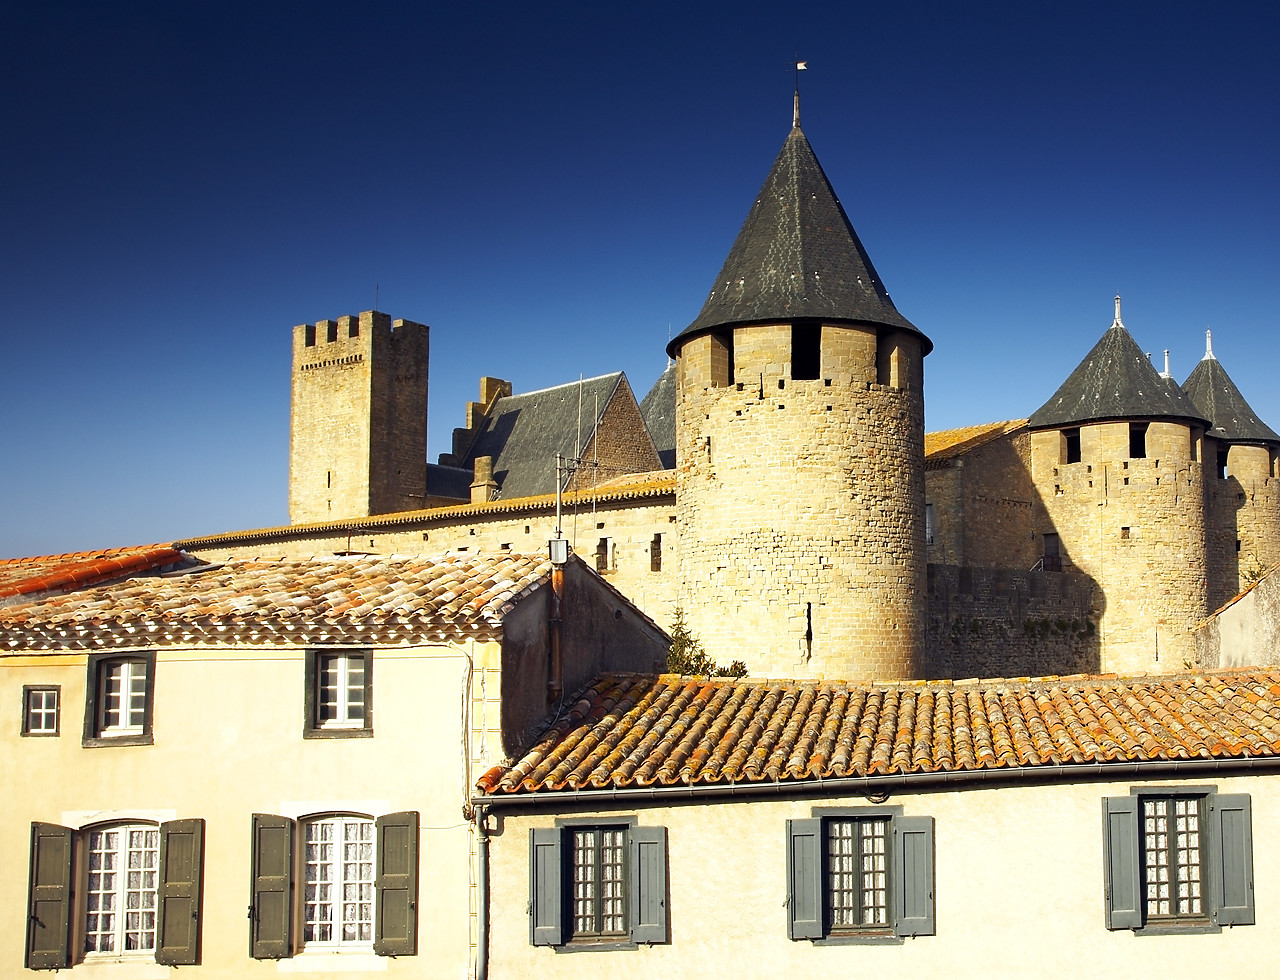 #070508-1 - Medieval Towers, Carcassonne, Languedoc, France